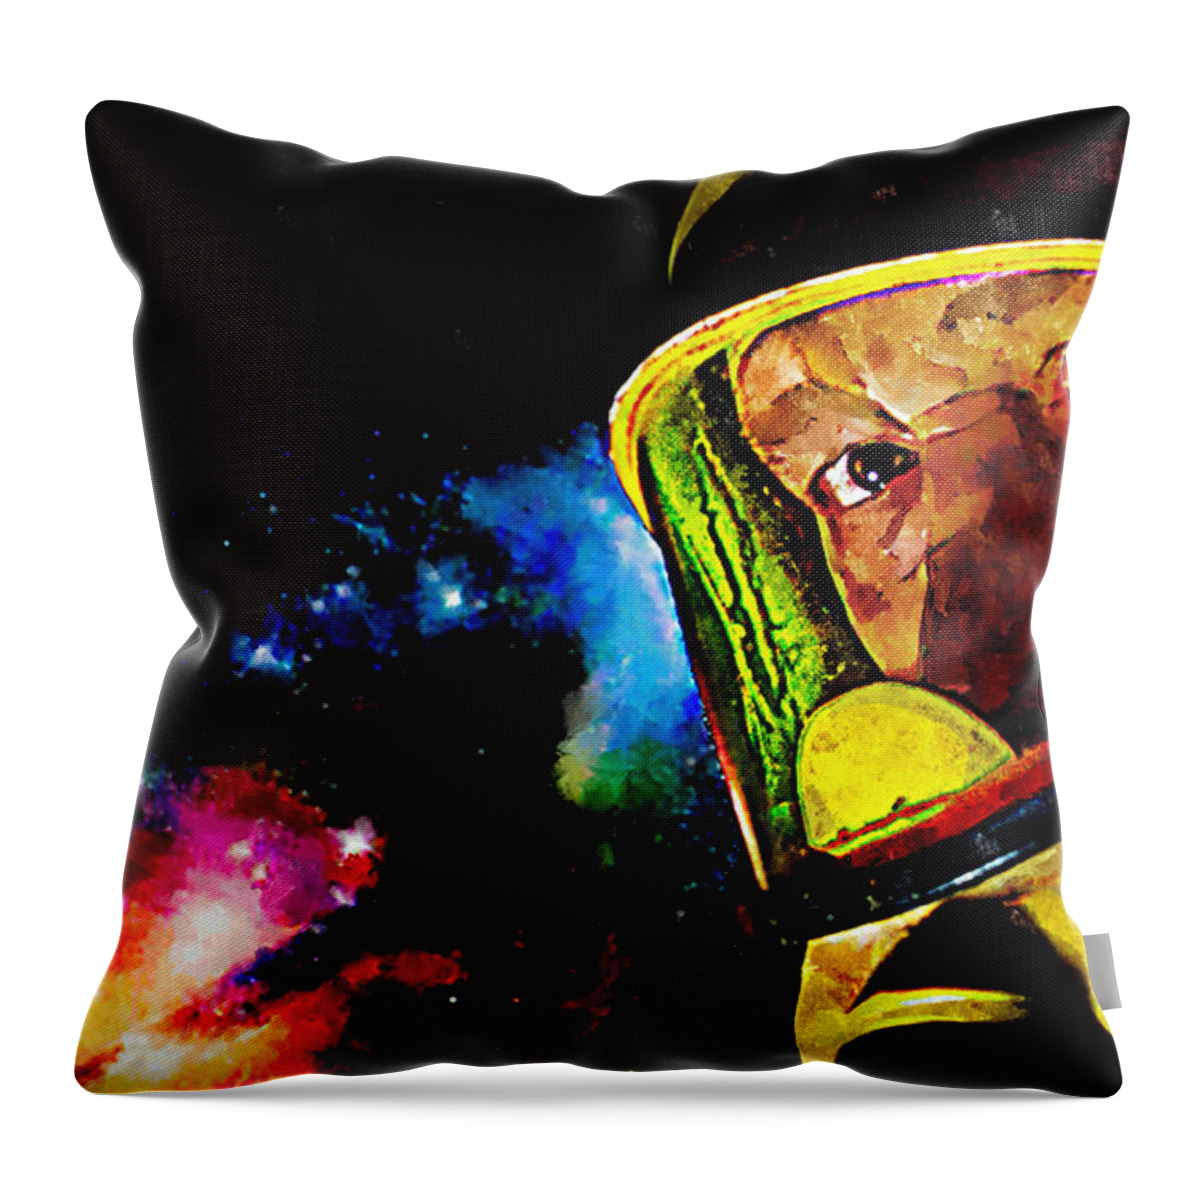 Space Throw Pillow featuring the painting Spaced by Rick Mosher